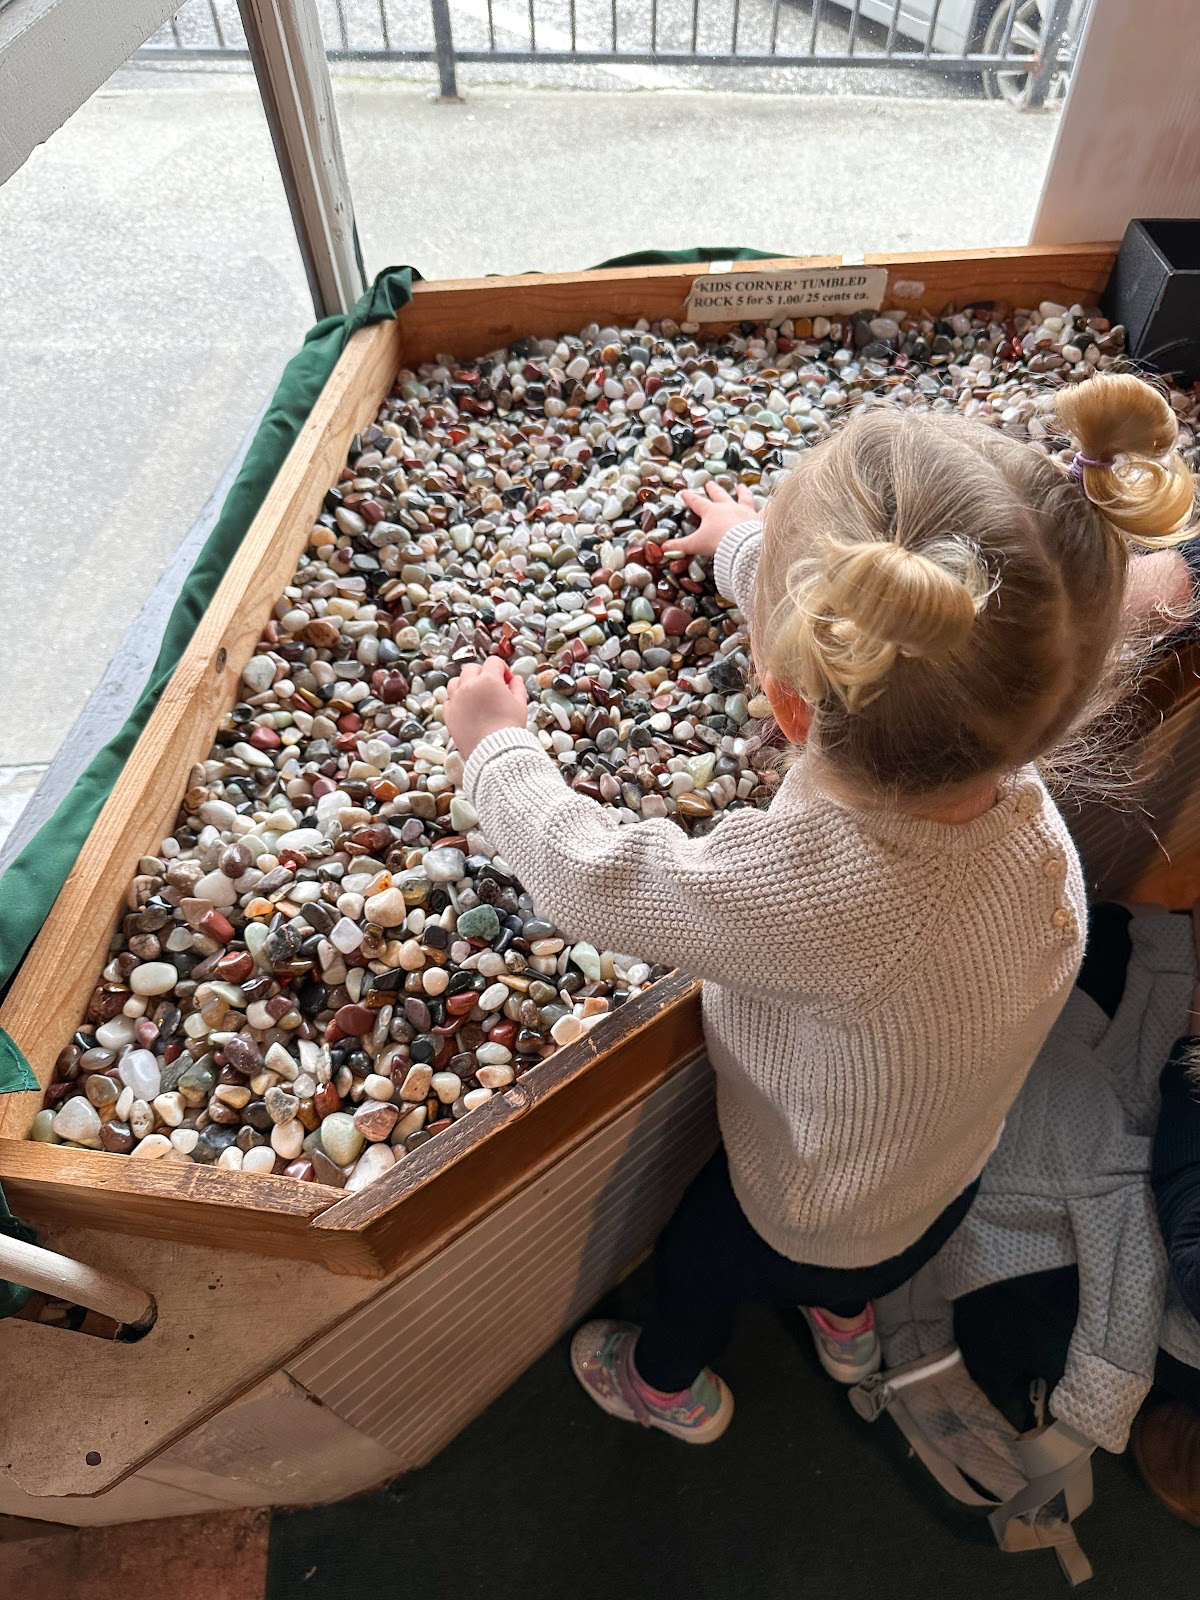 Little girl playing with bin of rocks.